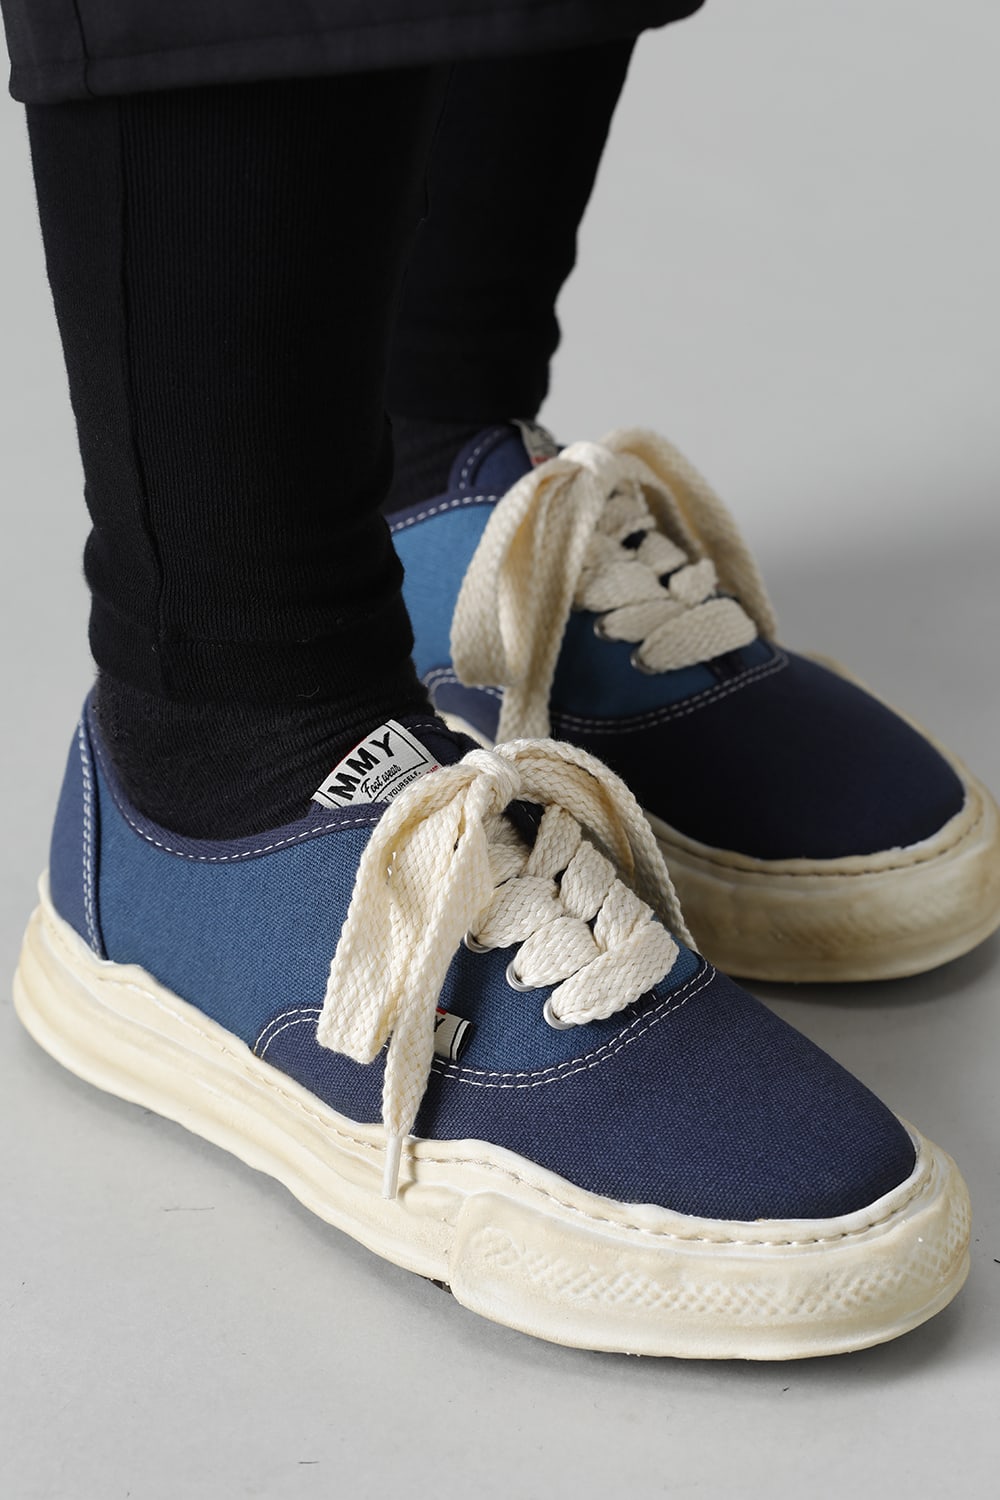 -BAKER- Over-dyed original sole canvas Low-Top sneakers Blue